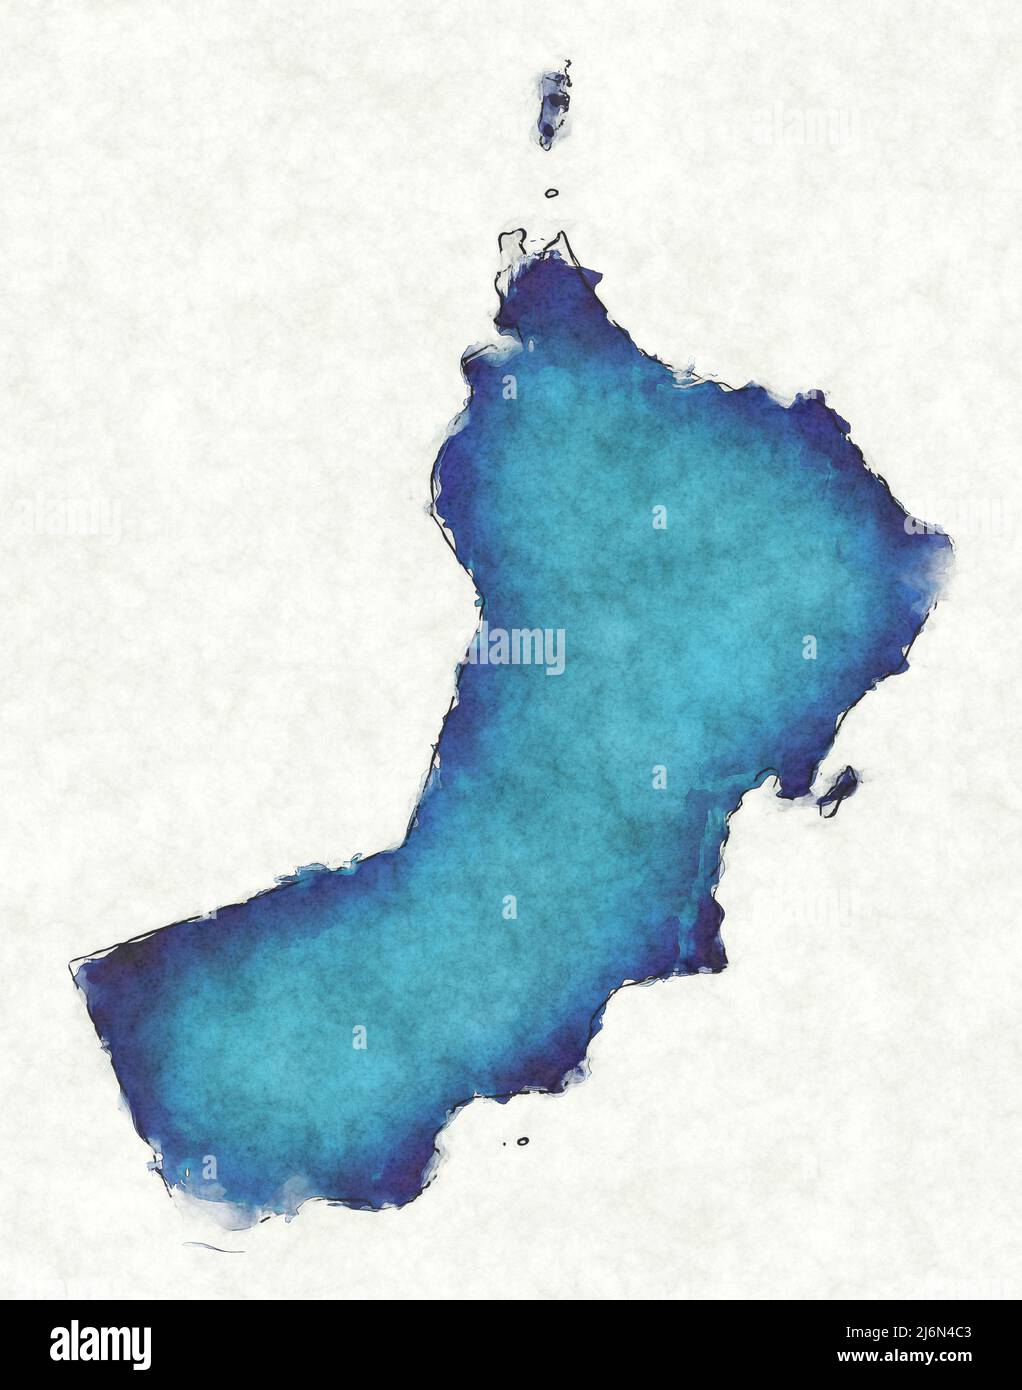 Oman map with drawn lines and blue watercolor illustration Stock Photo